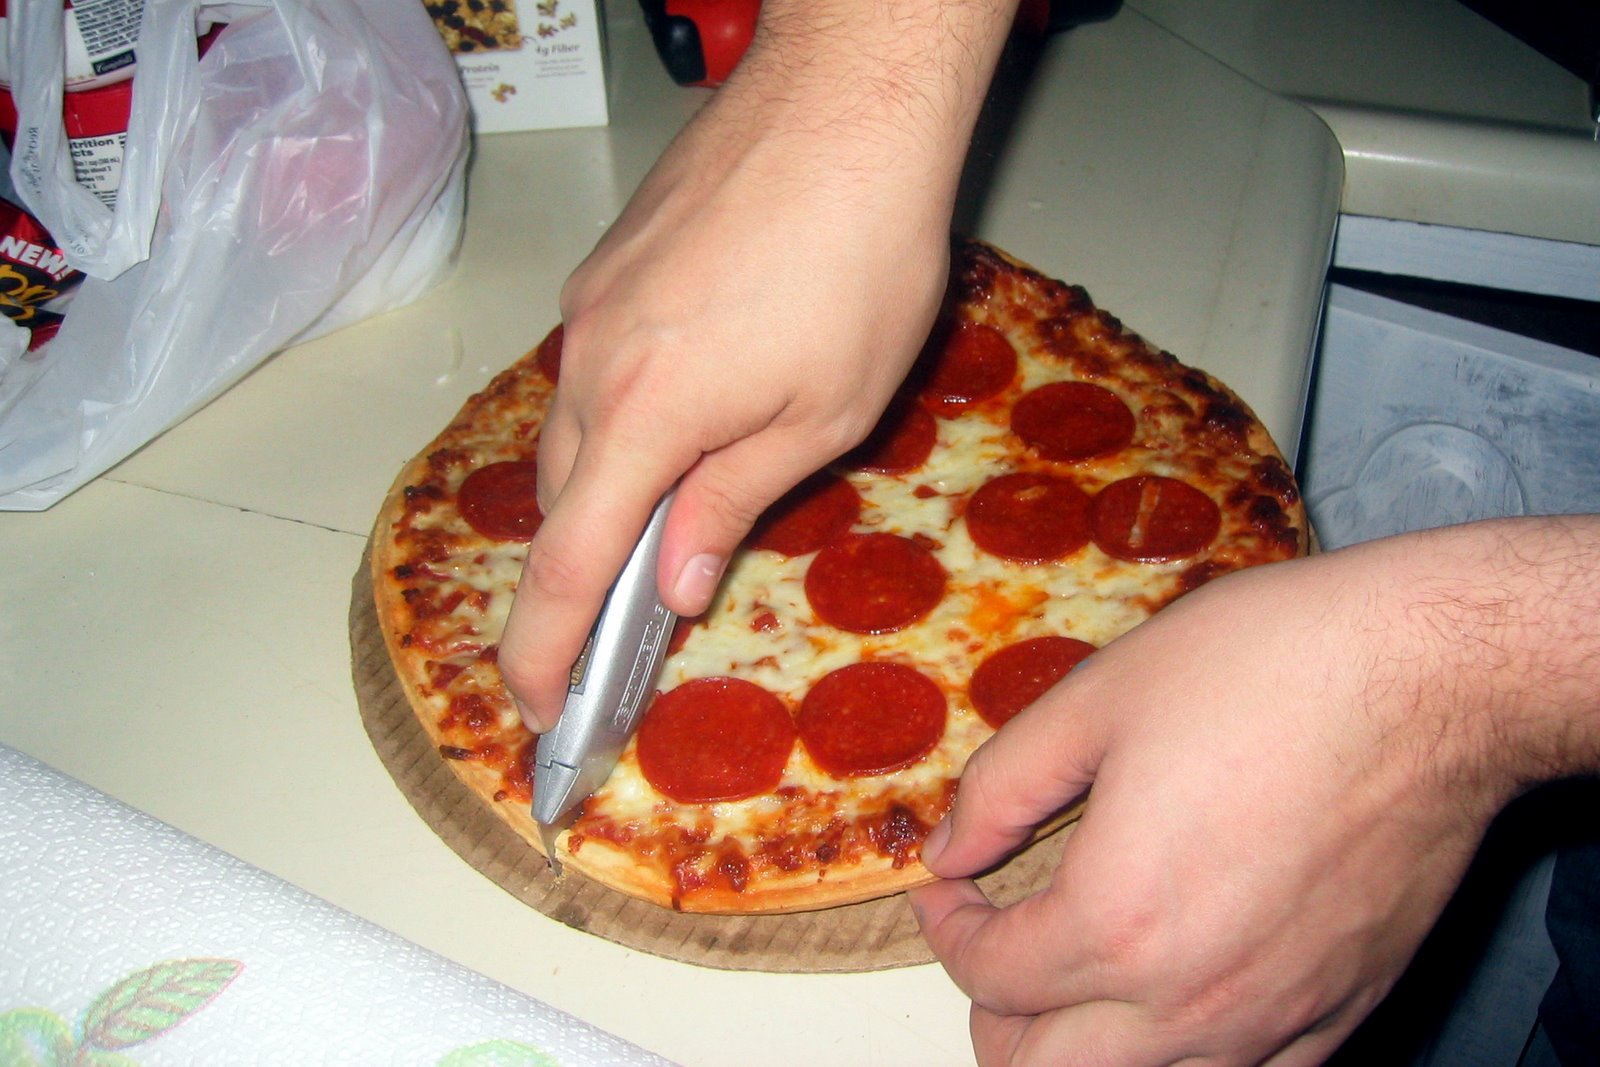 [cutting+pizza+with+carpet+knife.JPG]